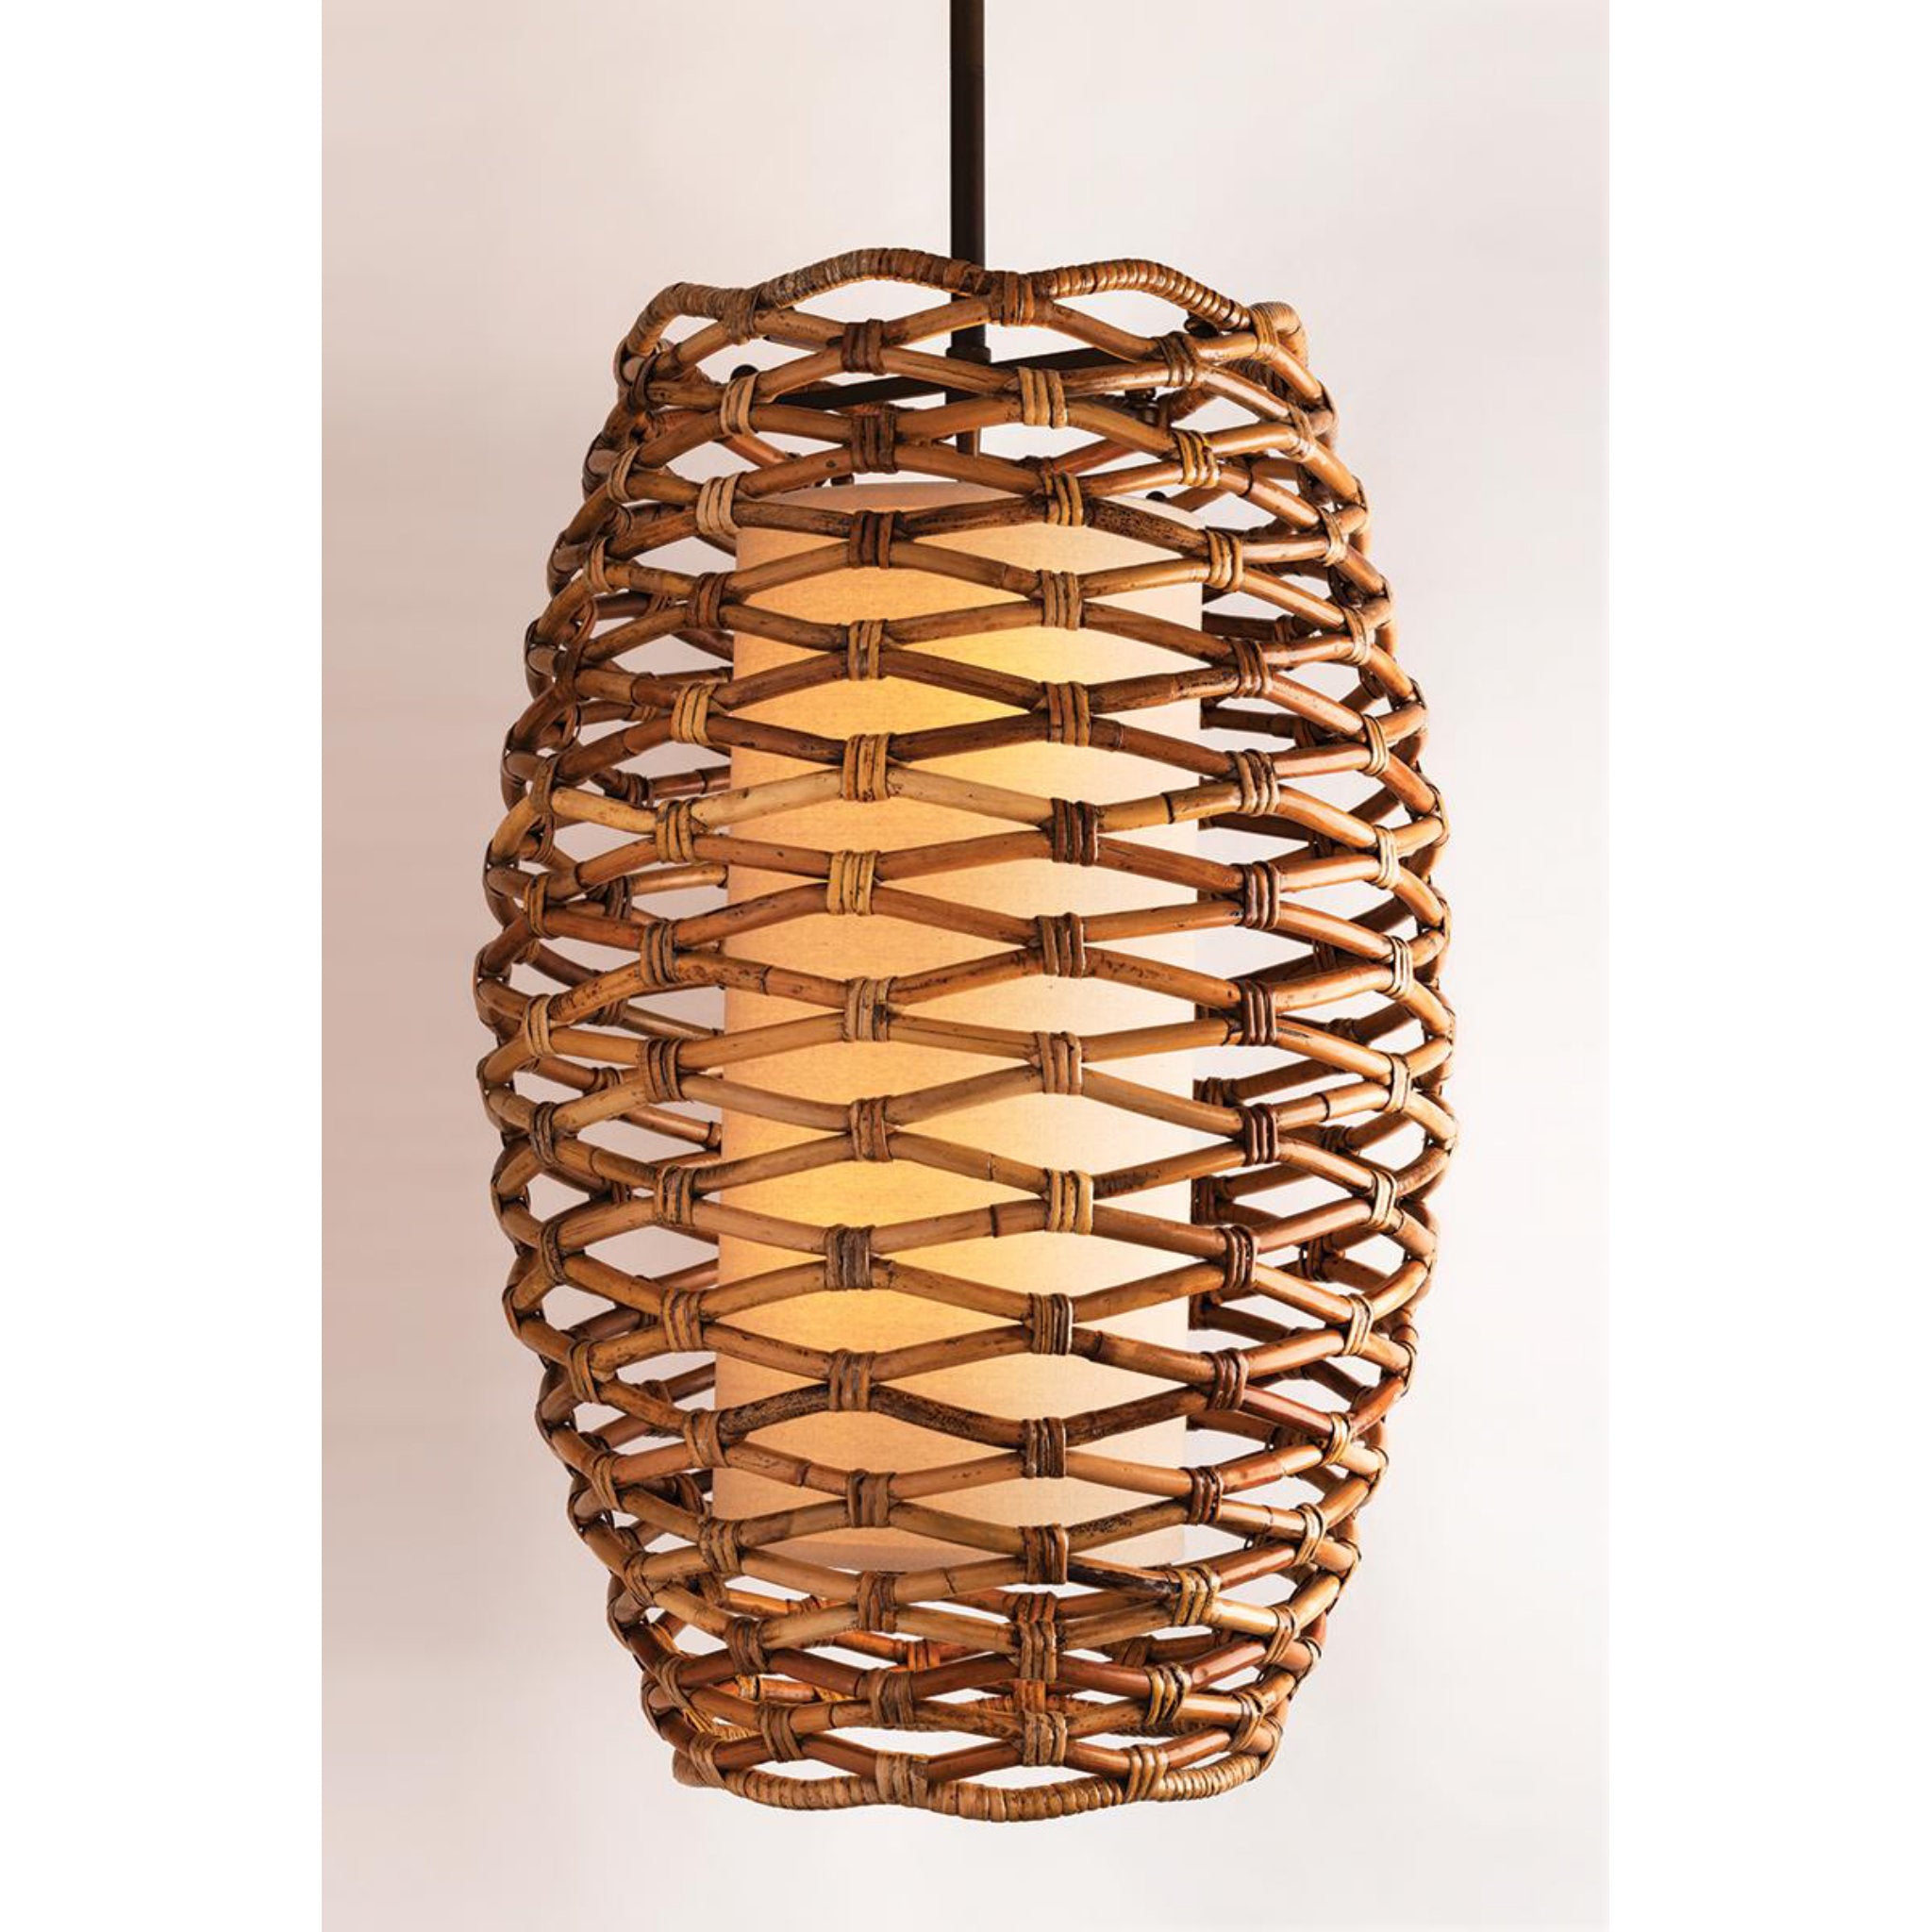 Balboa 1 Light Wall Sconce in Textured Bronze